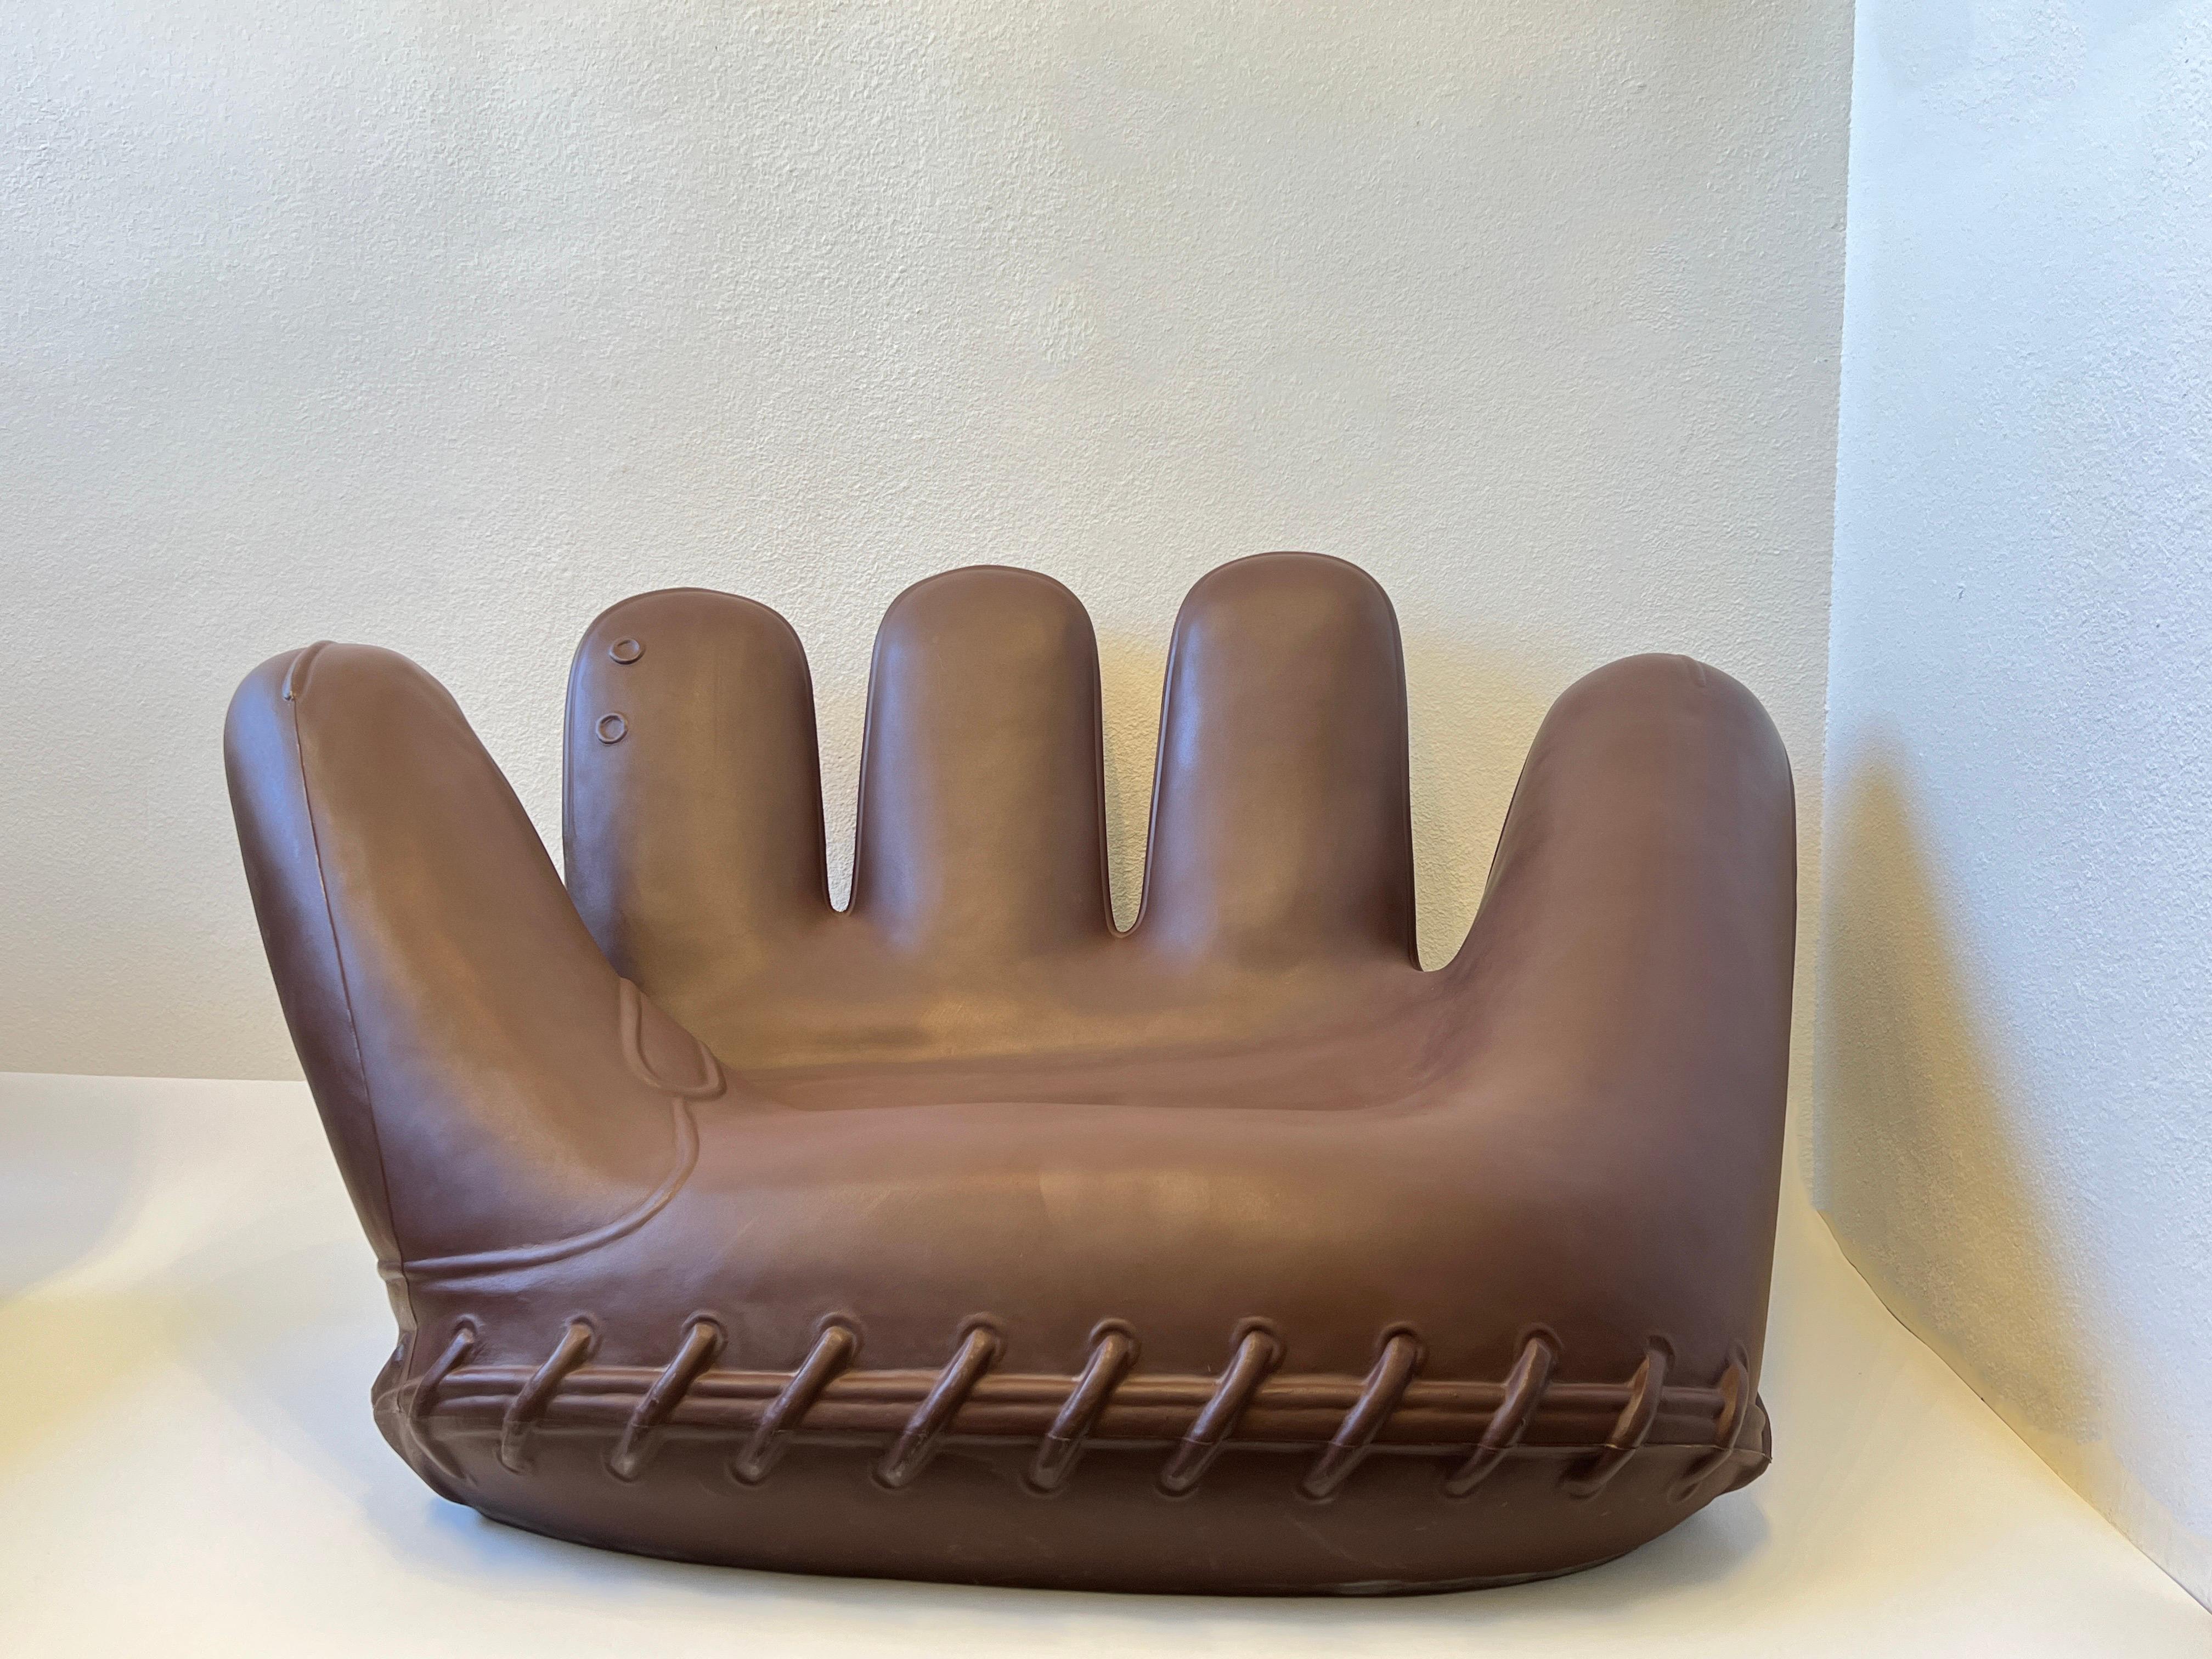 Cool Cast brown plastic Joe Glove chair designed by Gionathan de Pas, Donato D’Urbino and Paolo Lomazzi in 2003 for Heller. Design for outdoor. 
Shows some wear consistent with age(see detail photos). 

Measurements: 64” Wide, 42” Deep, 33” High,